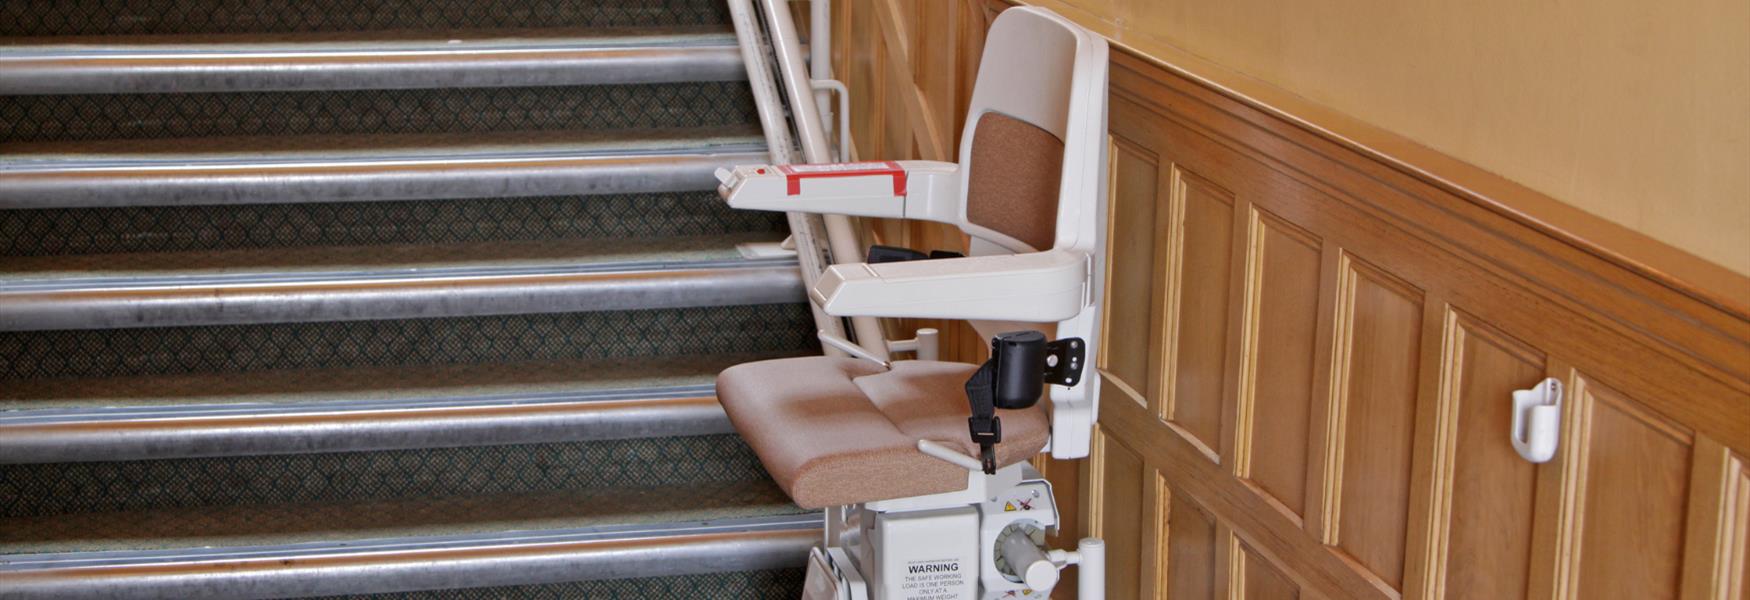 A Stairlift at the bottom of stairs